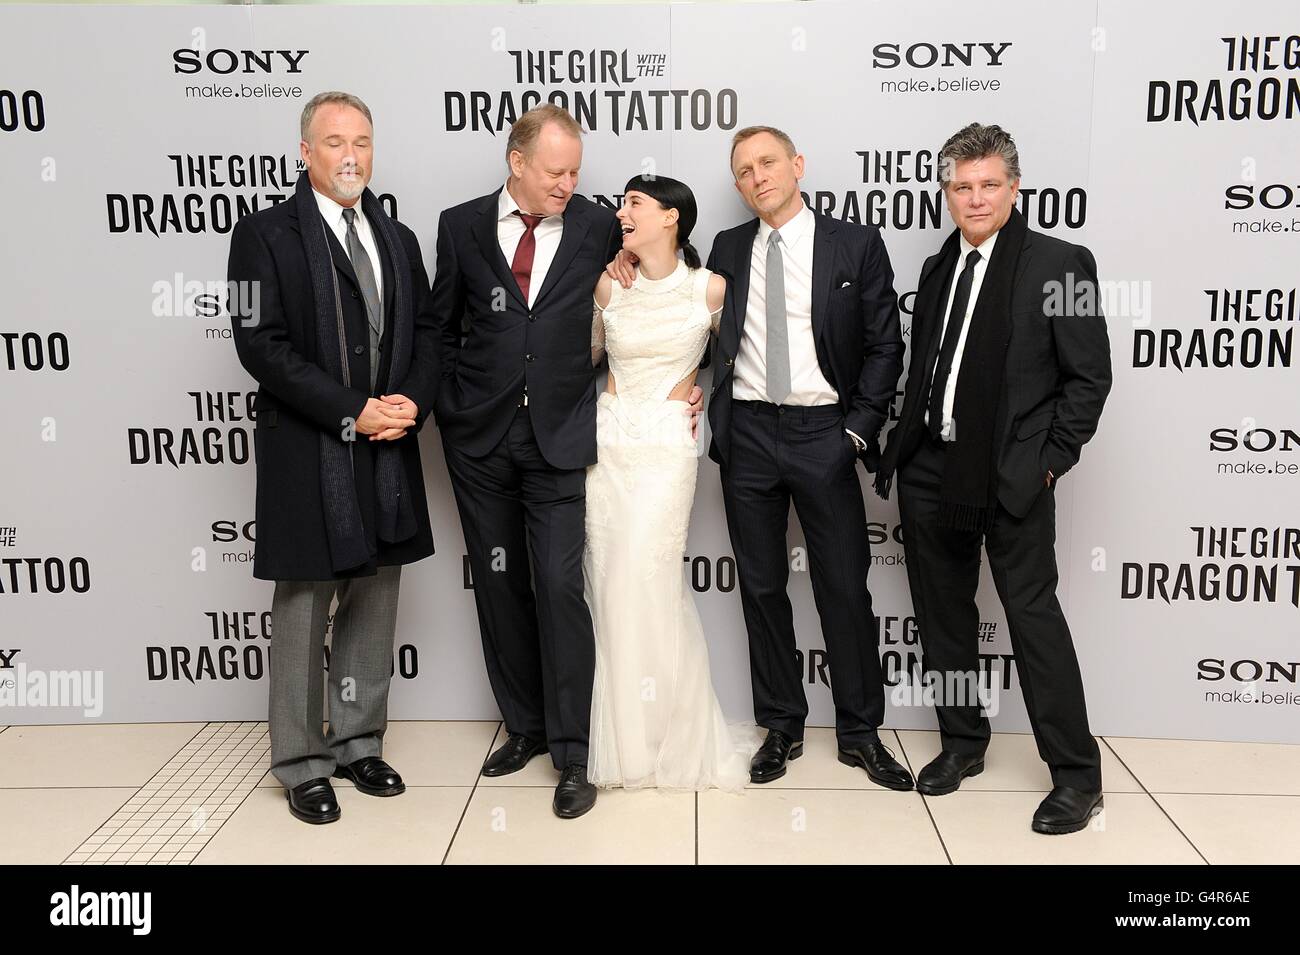 David Fincher, Stellen Skarsgard, Rooney Mara, Daniel Craig and Steven Zaillian arriving for the world premiere of The Girl with The Dragon Tattoo, at Odeon, Leicester Square, London. Stock Photo